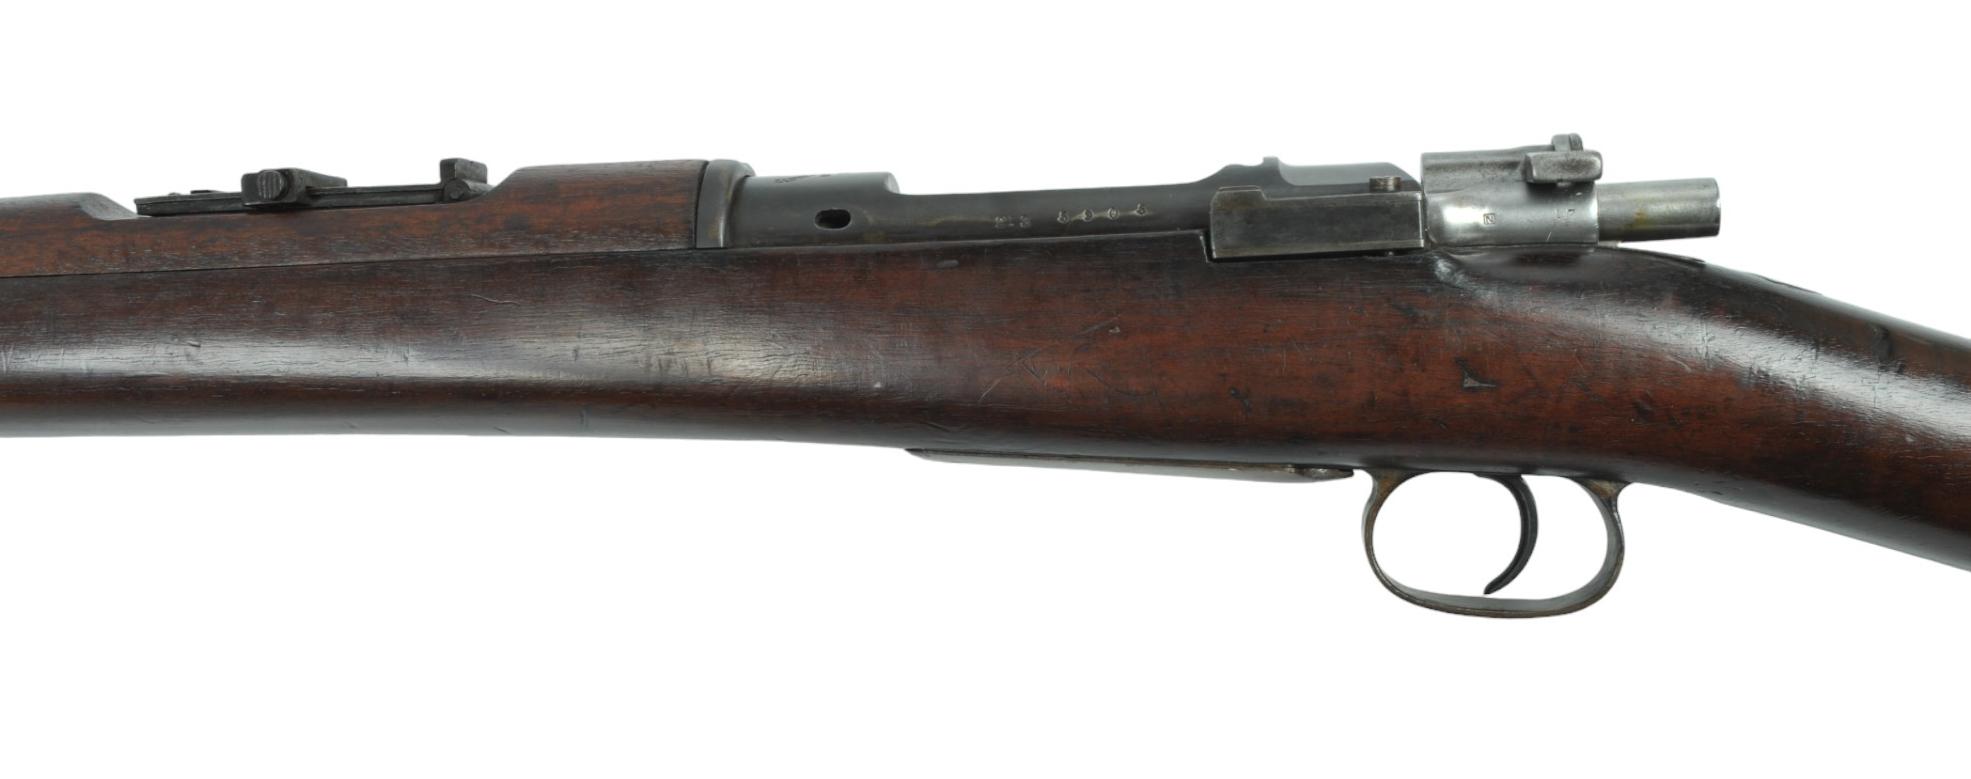 Spanish Mauser M1893 7x57MM Bolt-action Rifle FFL Required: 2S5905 (A1)